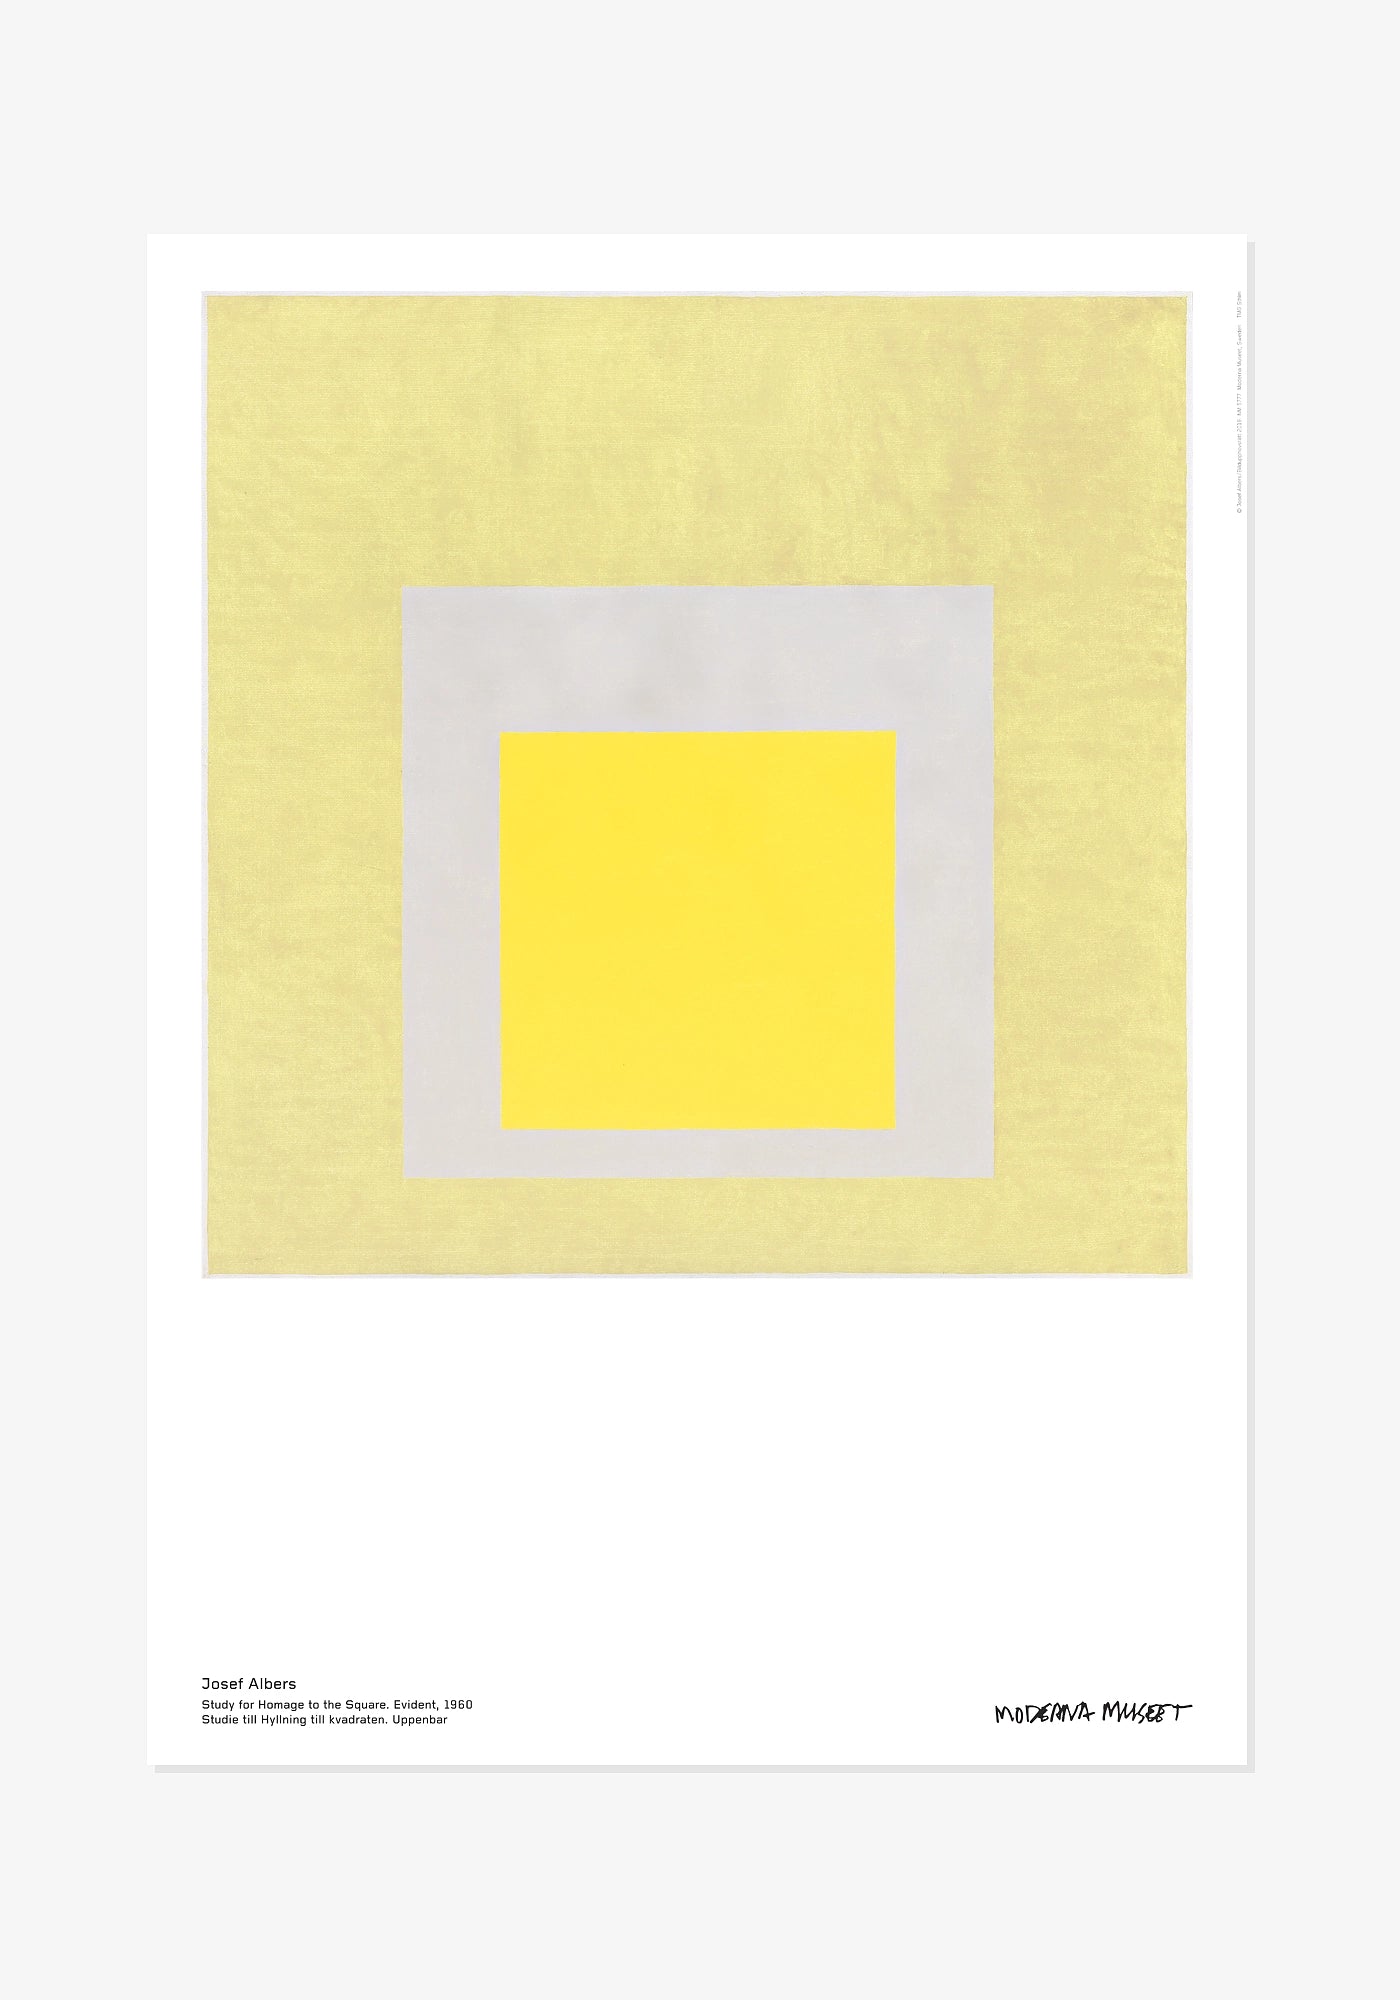 Josef Albers / Study for Homage to the Square. Evident, 1960